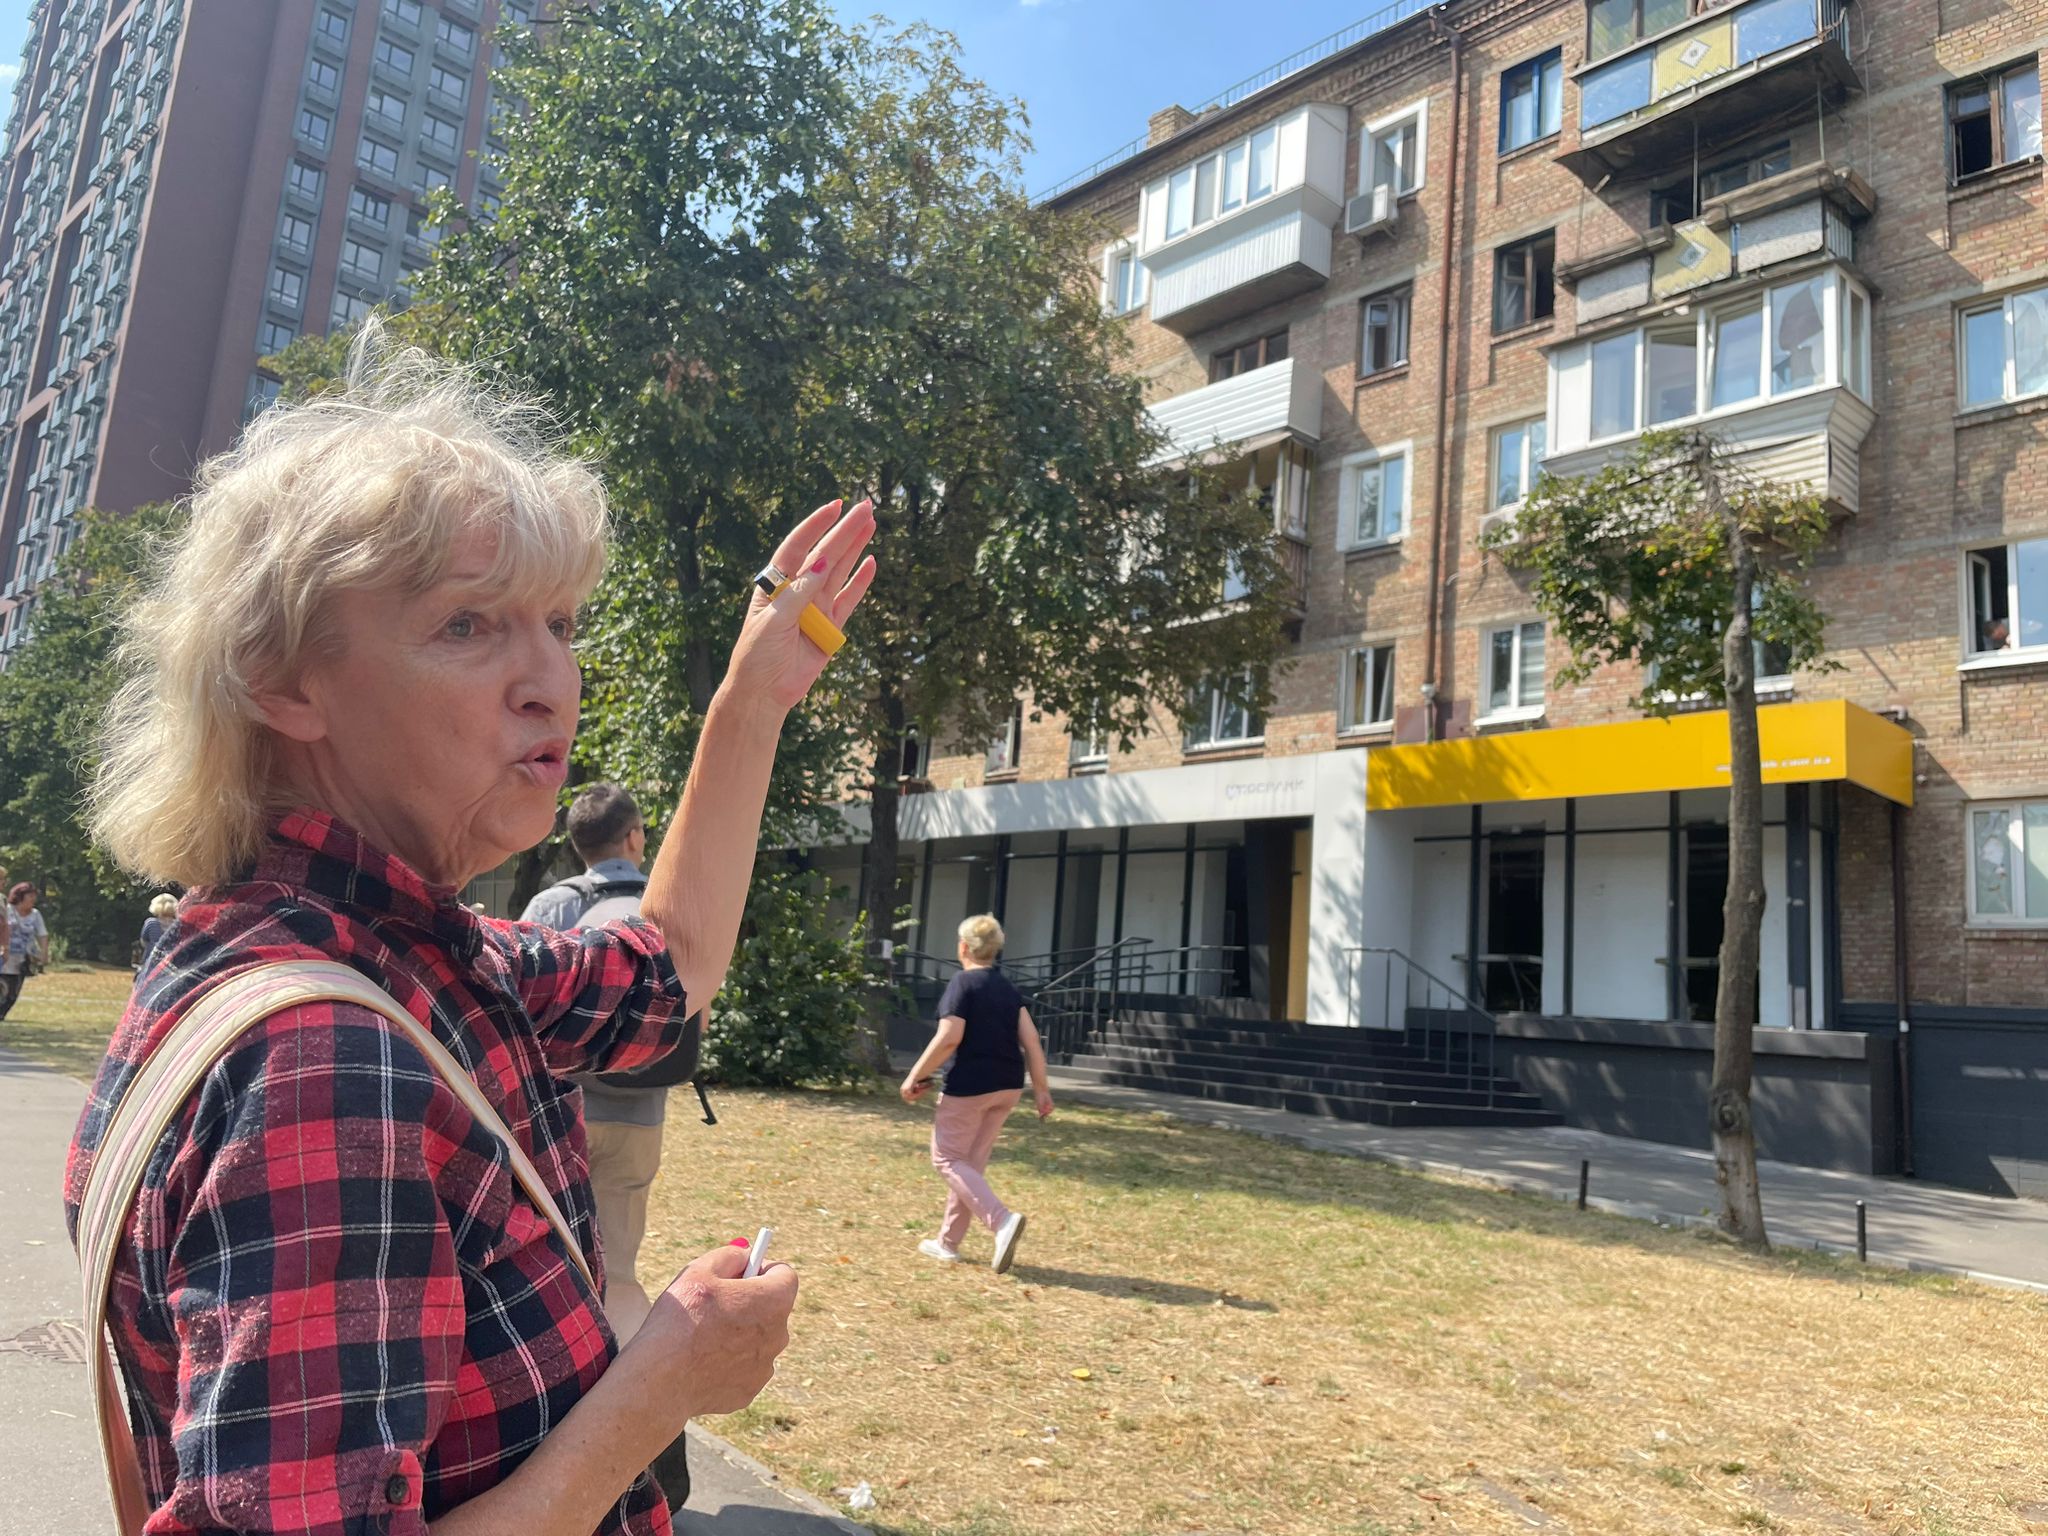 Yelena Yemelyanova, 69 year old retired medical worker, points up at her balcony. The explosion on August 30 blew out her windows and blast wave threw her against a wall.